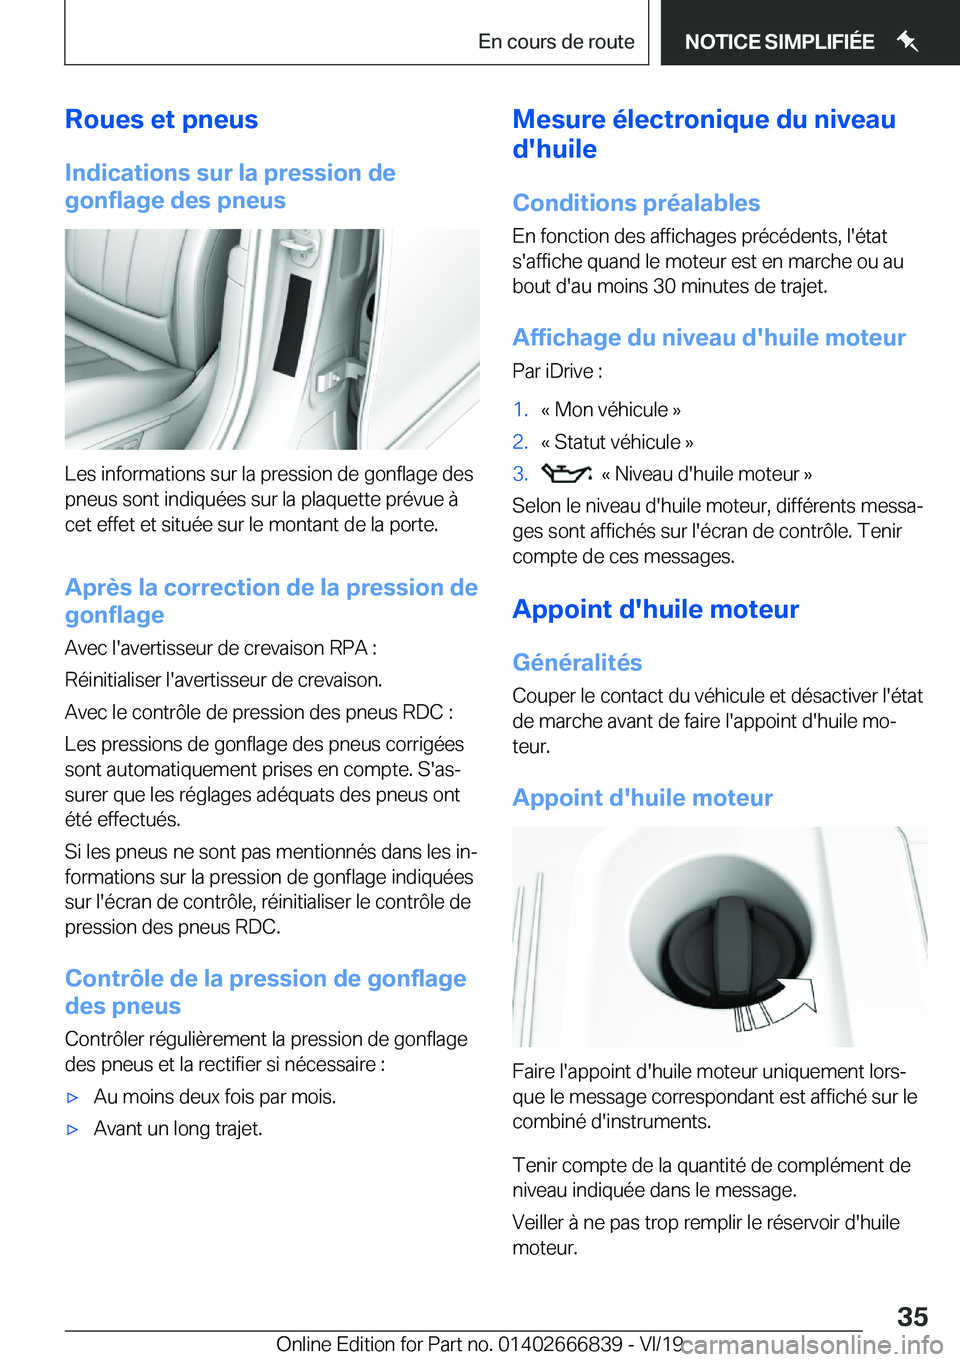 BMW X3 M 2020  Notices Demploi (in French) �R�o�u�e�s��e�t��p�n�e�u�s
�I�n�d�i�c�a�t�i�o�n�s��s�u�r��l�a��p�r�e�s�s�i�o�n��d�e
�g�o�n�f�l�a�g�e��d�e�s��p�n�e�u�s
�L�e�s��i�n�f�o�r�m�a�t�i�o�n�s��s�u�r��l�a��p�r�e�s�s�i�o�n��d�e��